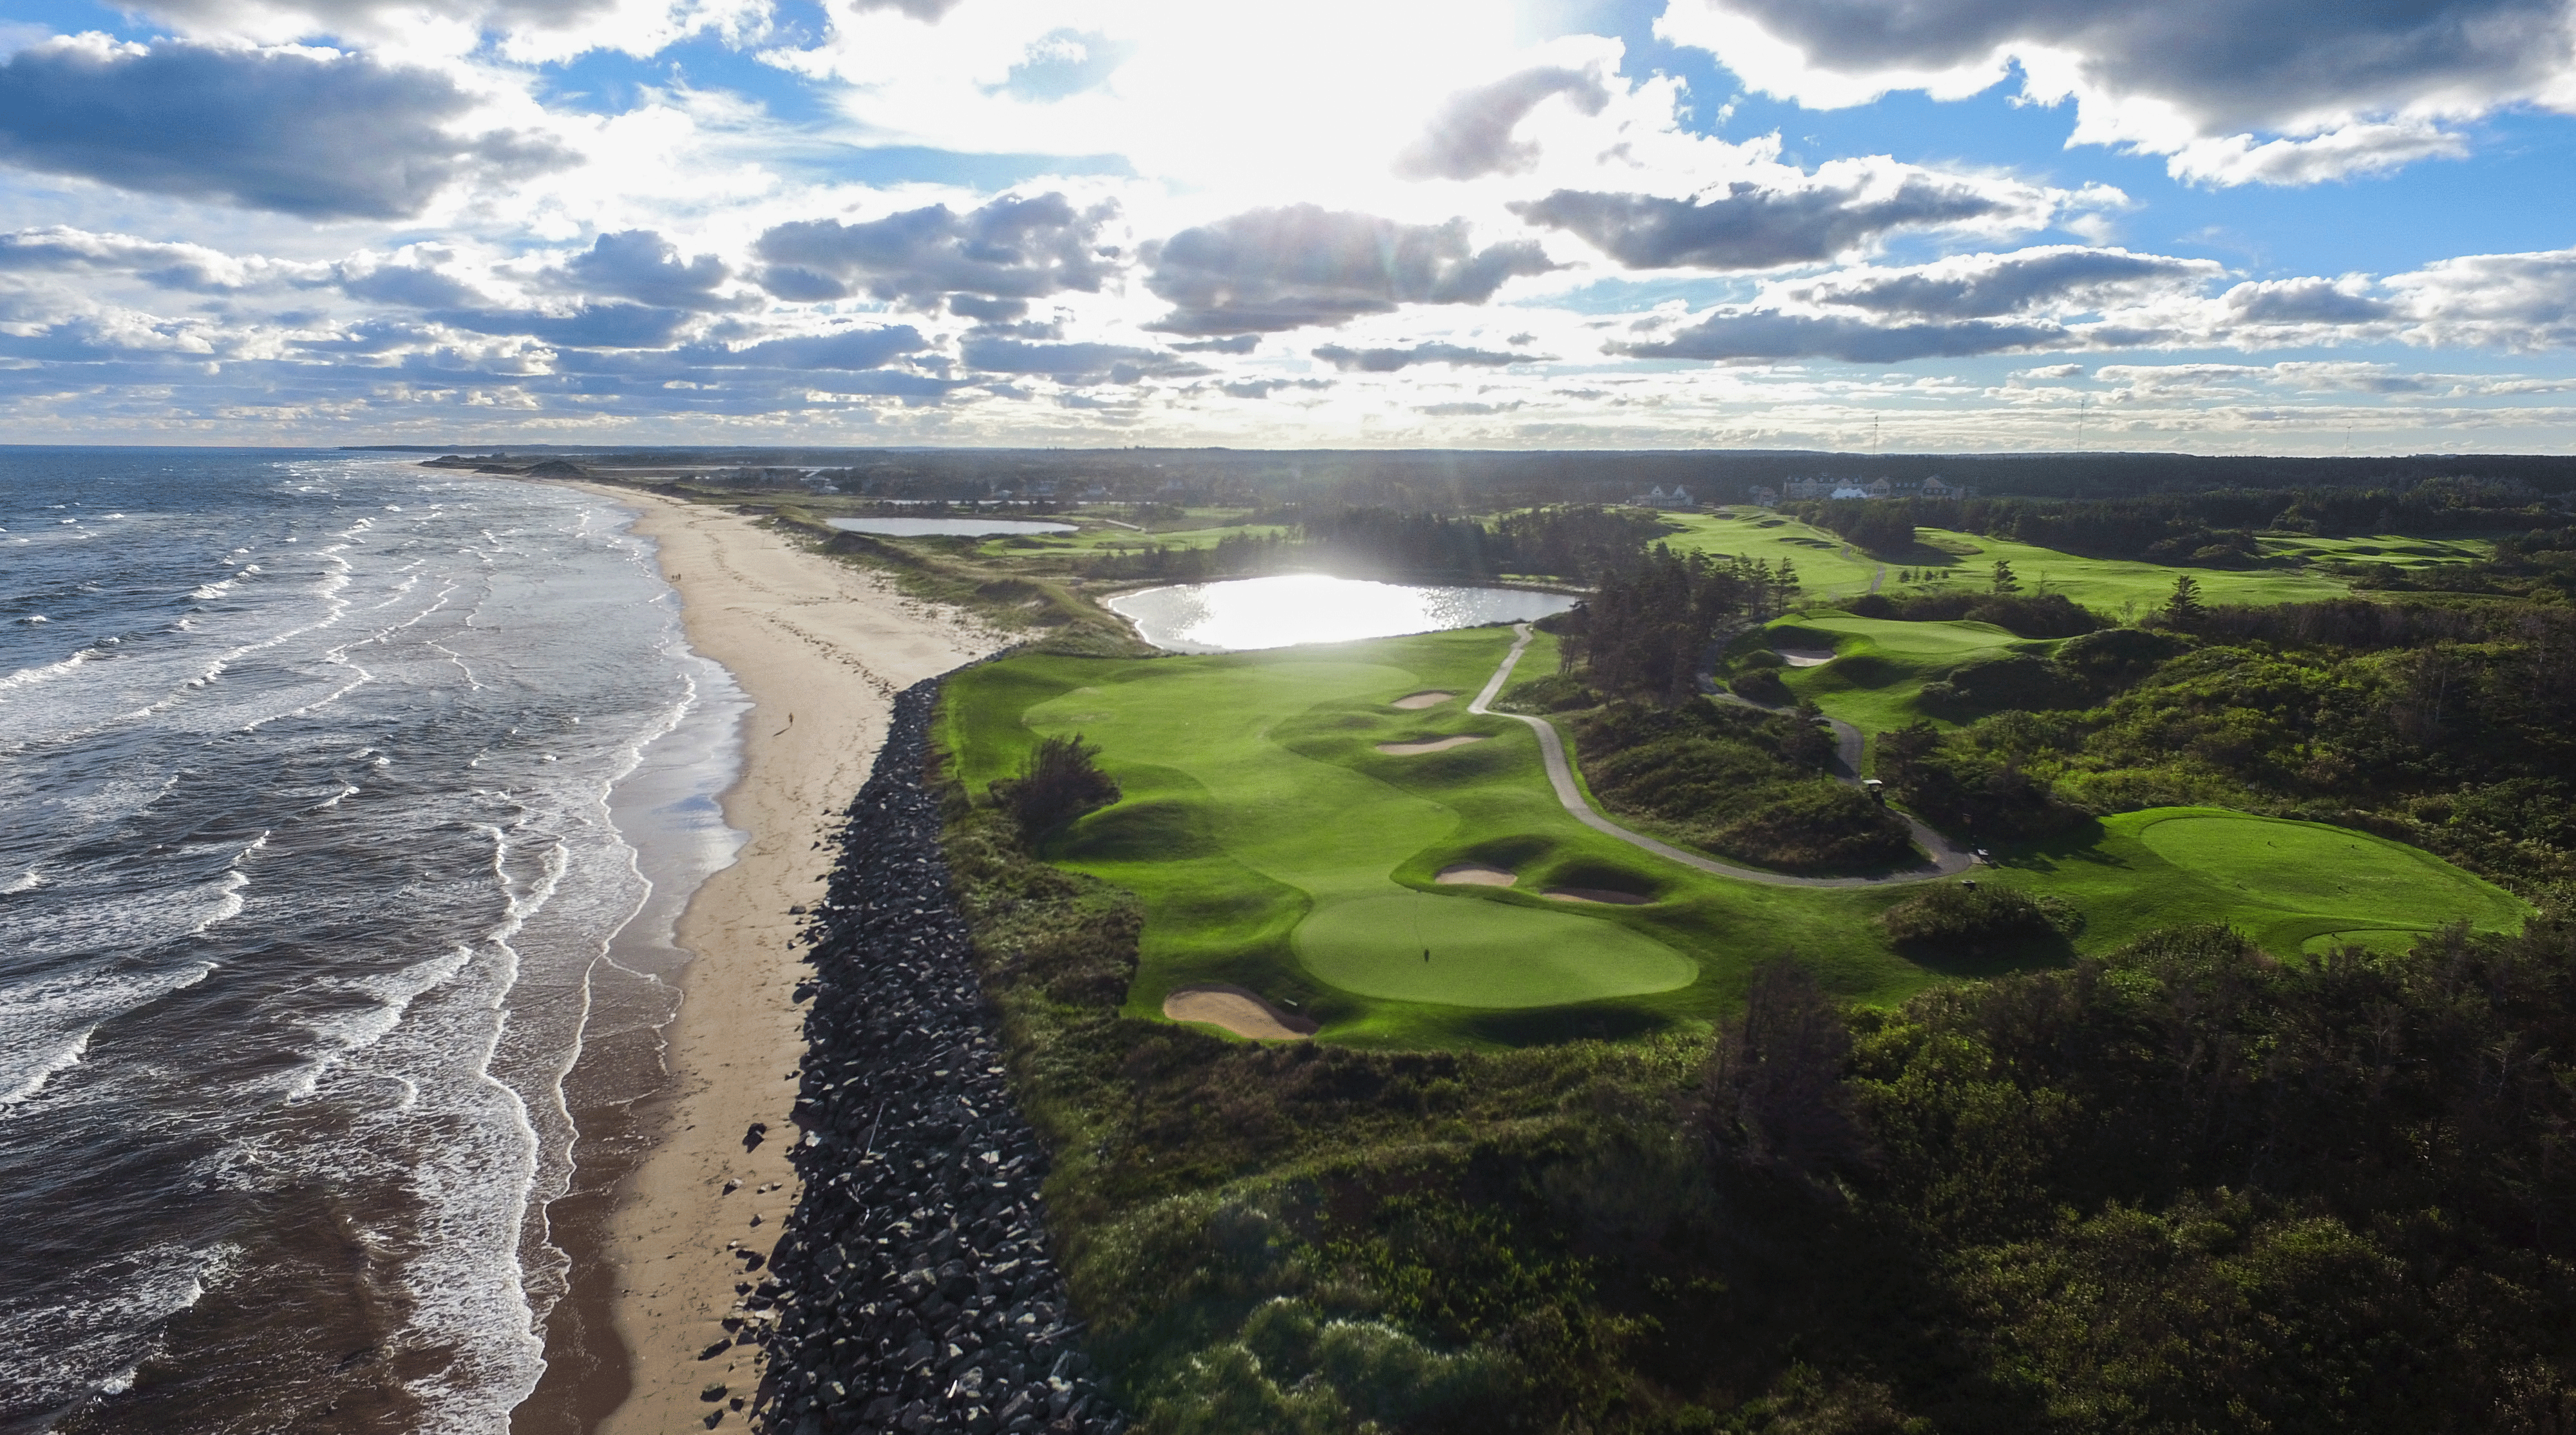 The golf course at Rodd Crowbush sits hard against the beach.